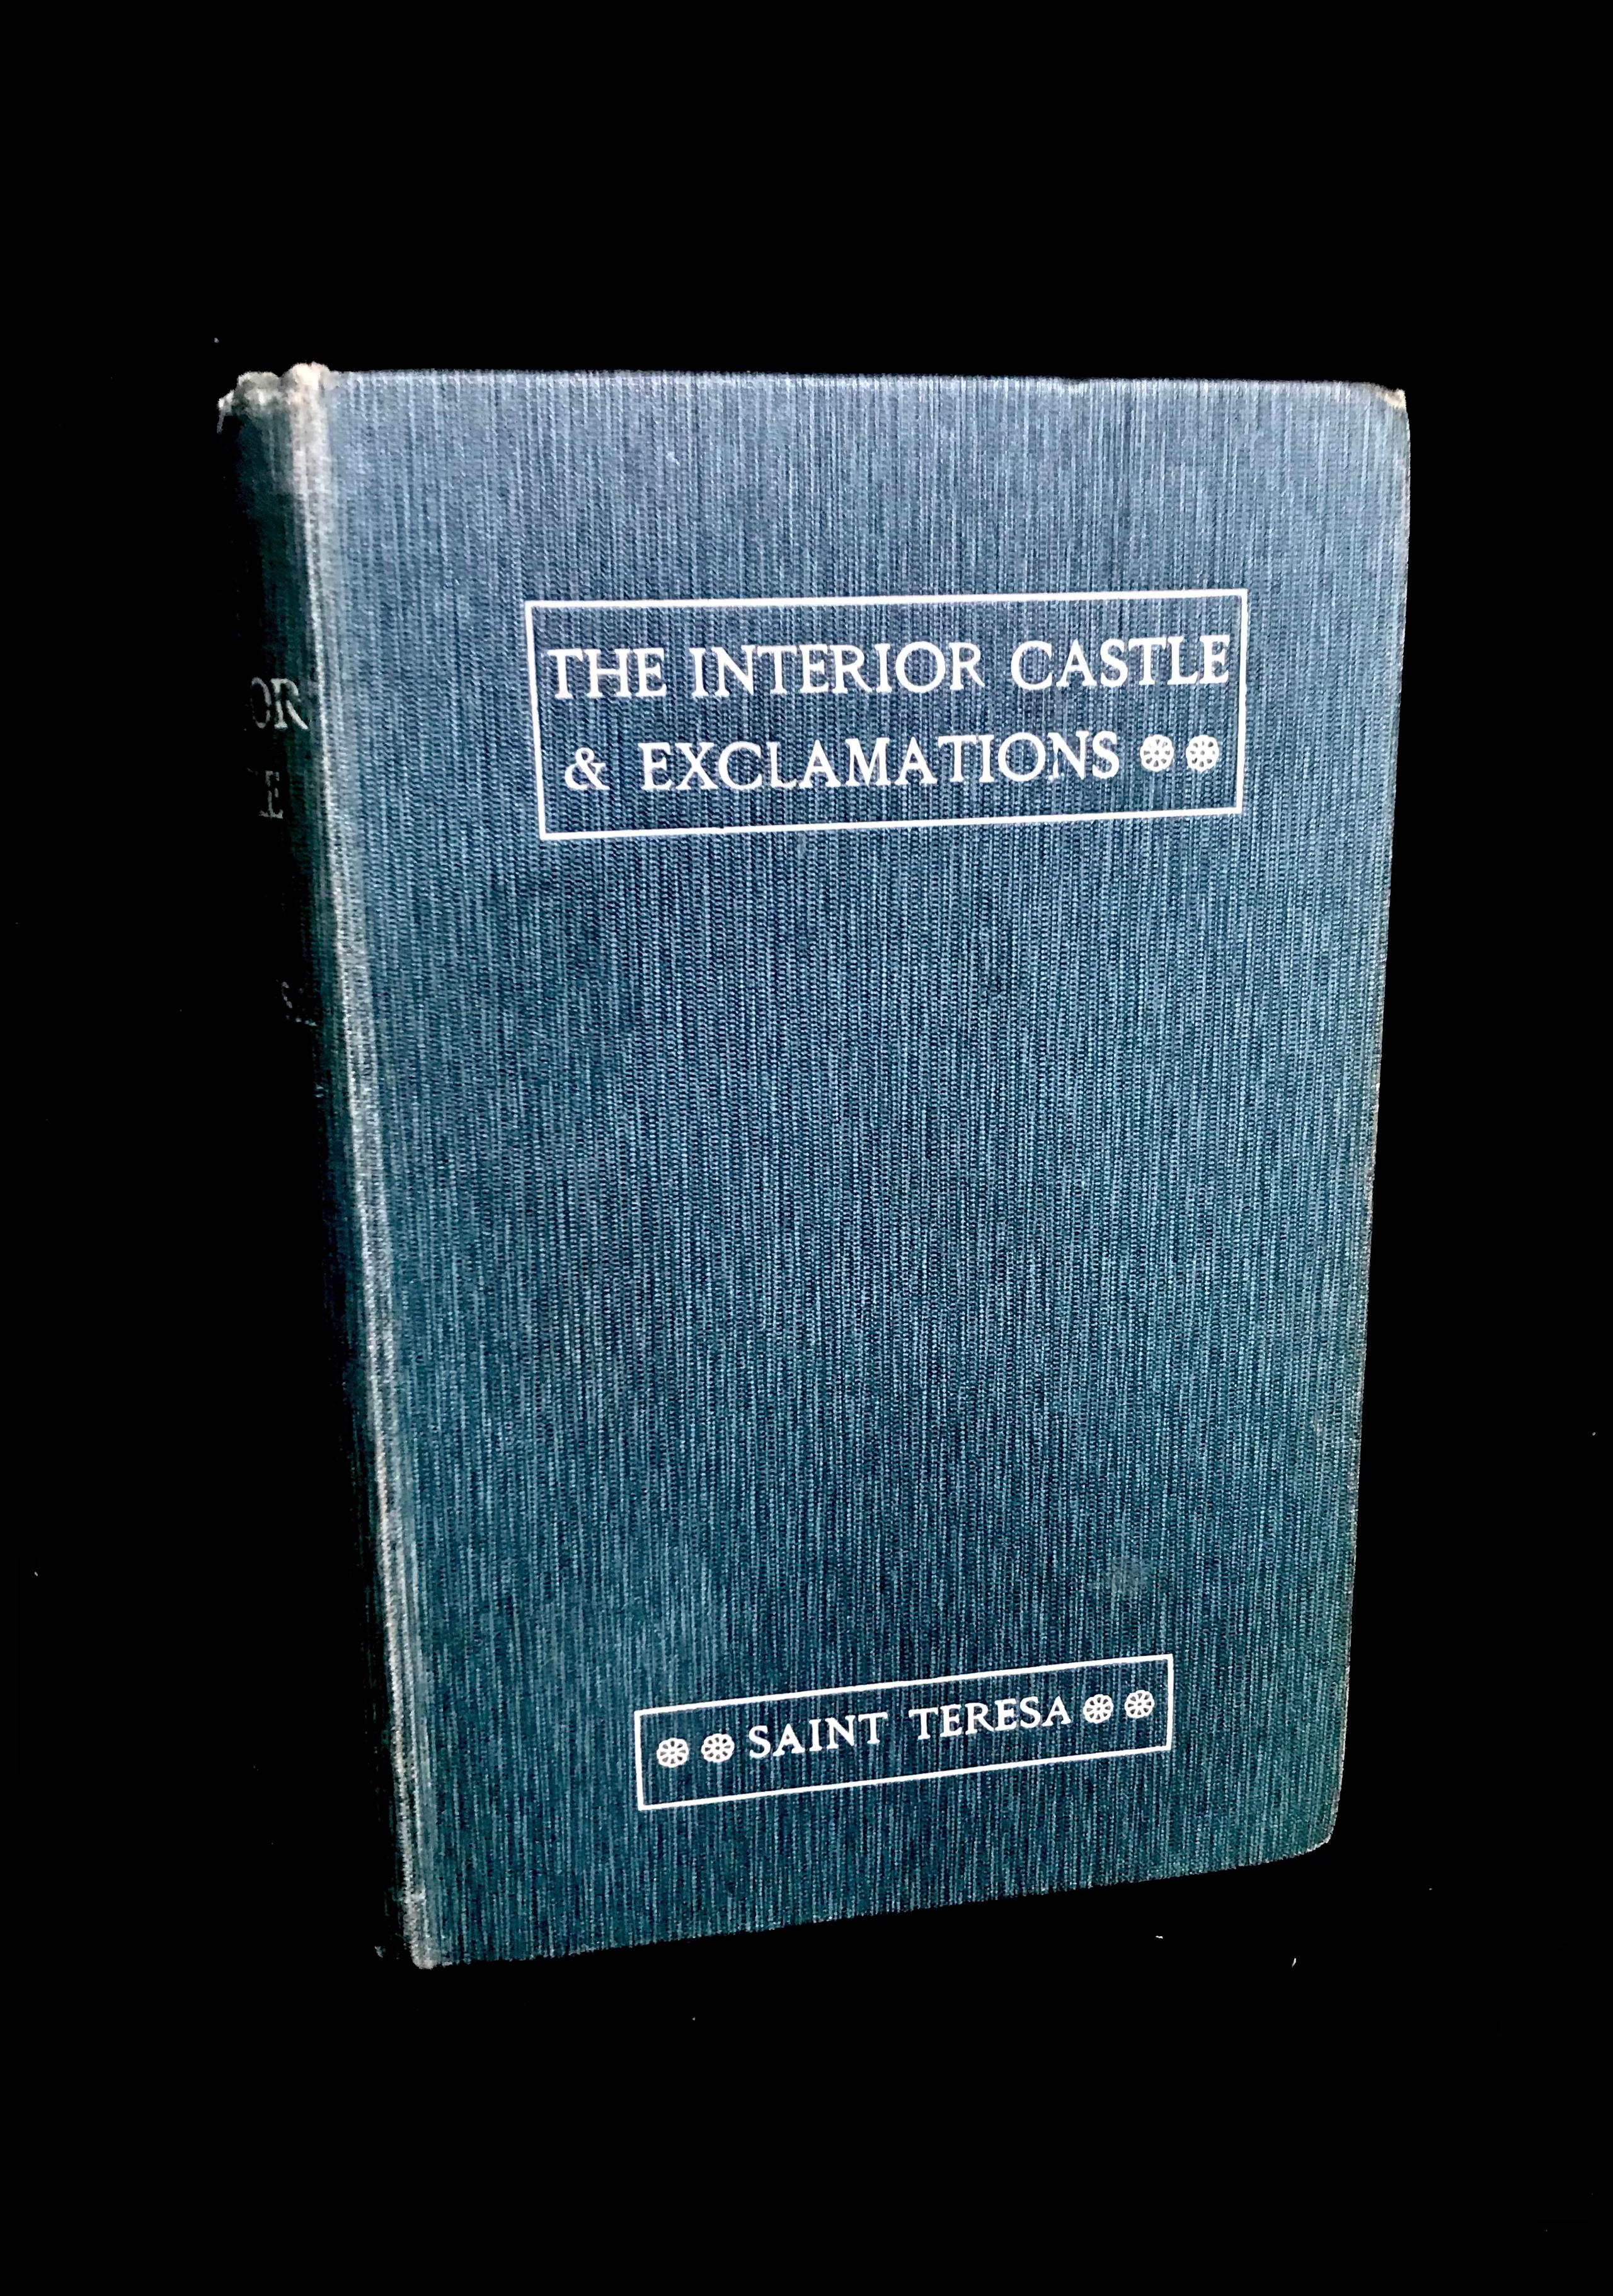 The Interior Castle or The Mansions & Exclamations of the Soul To God by Saint Teresa of Avila